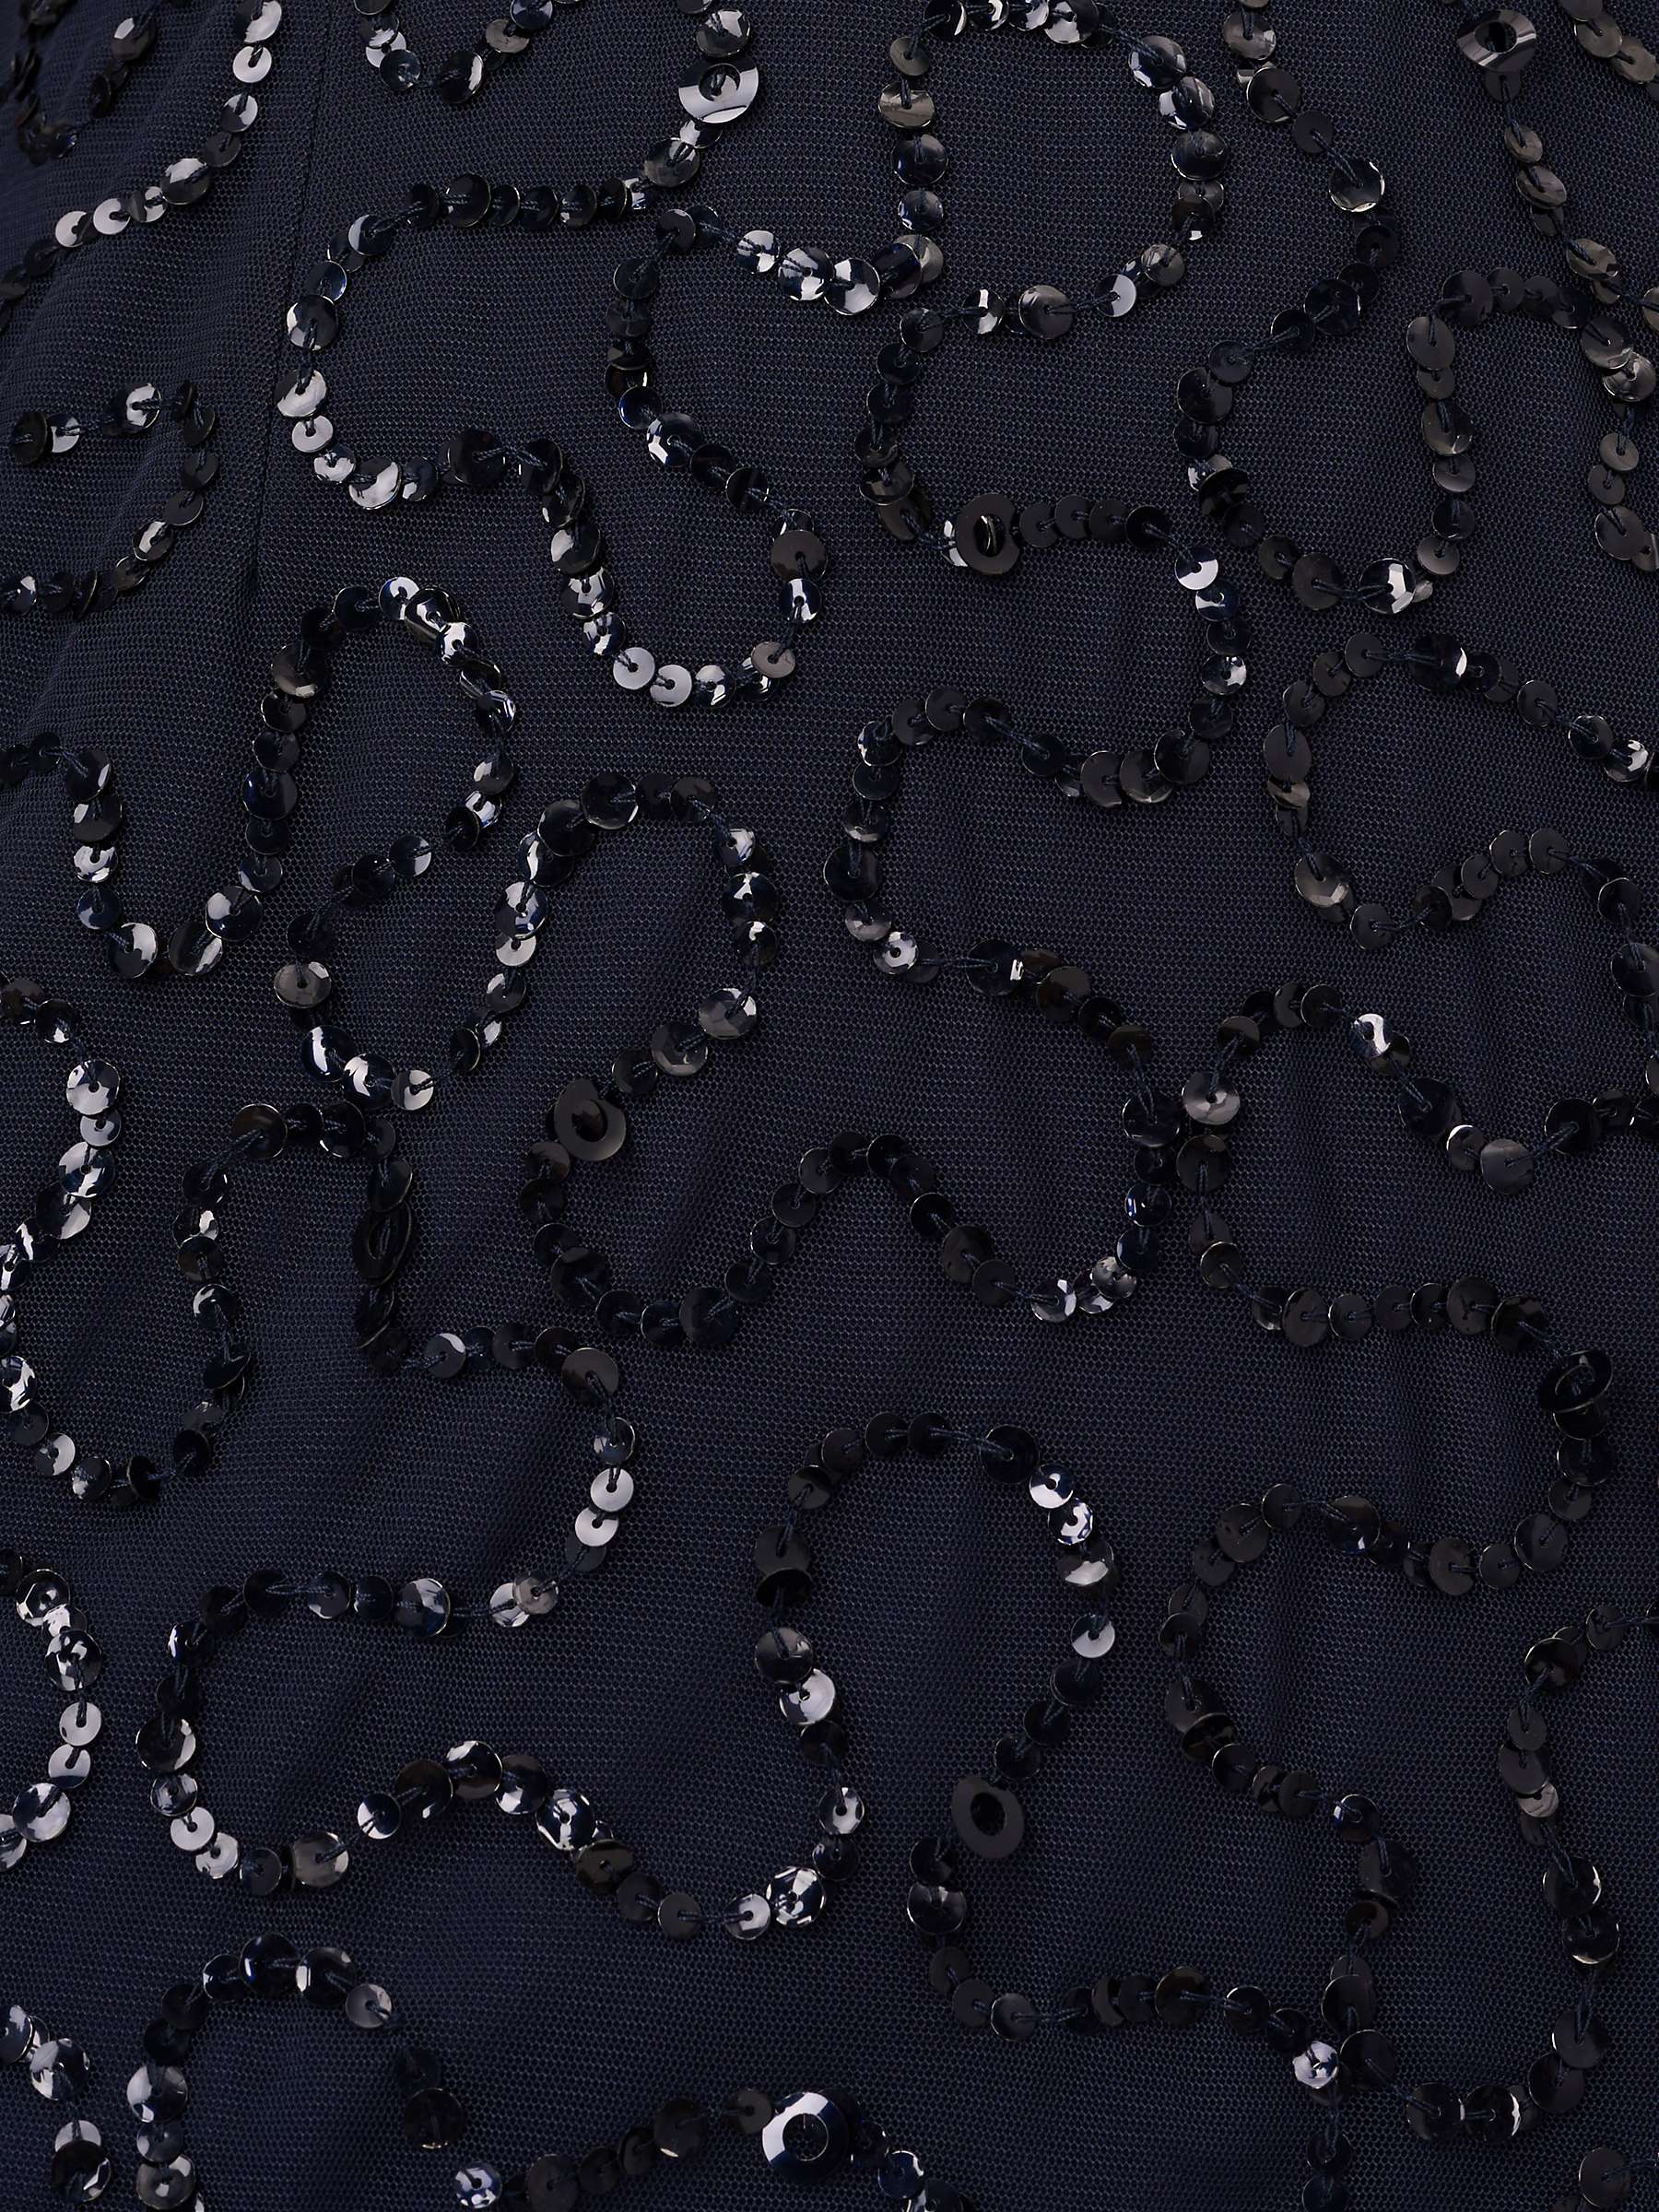 Buy Adrianna Papell Papell Studio Beaded Sheath Dress, Navy Online at johnlewis.com